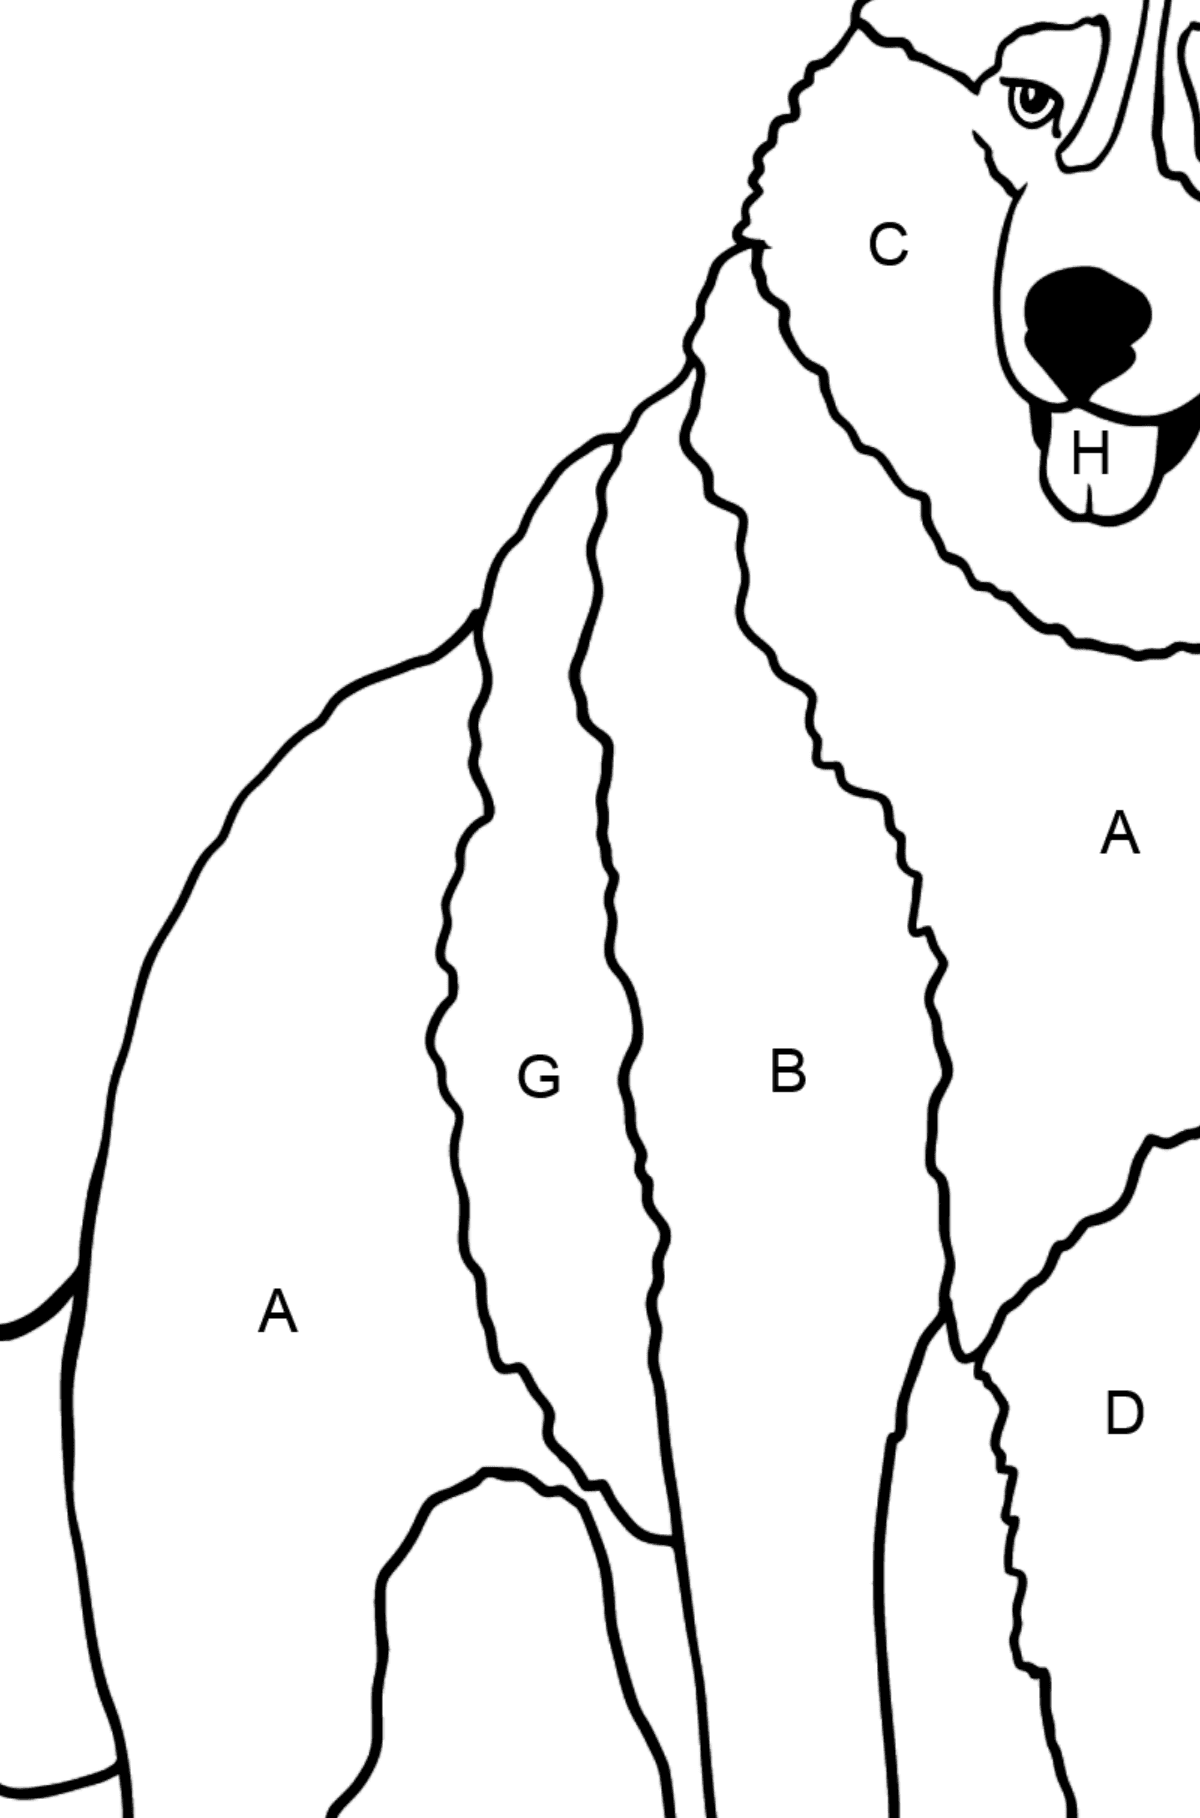 Husky coloring page - Coloring by Letters for Kids